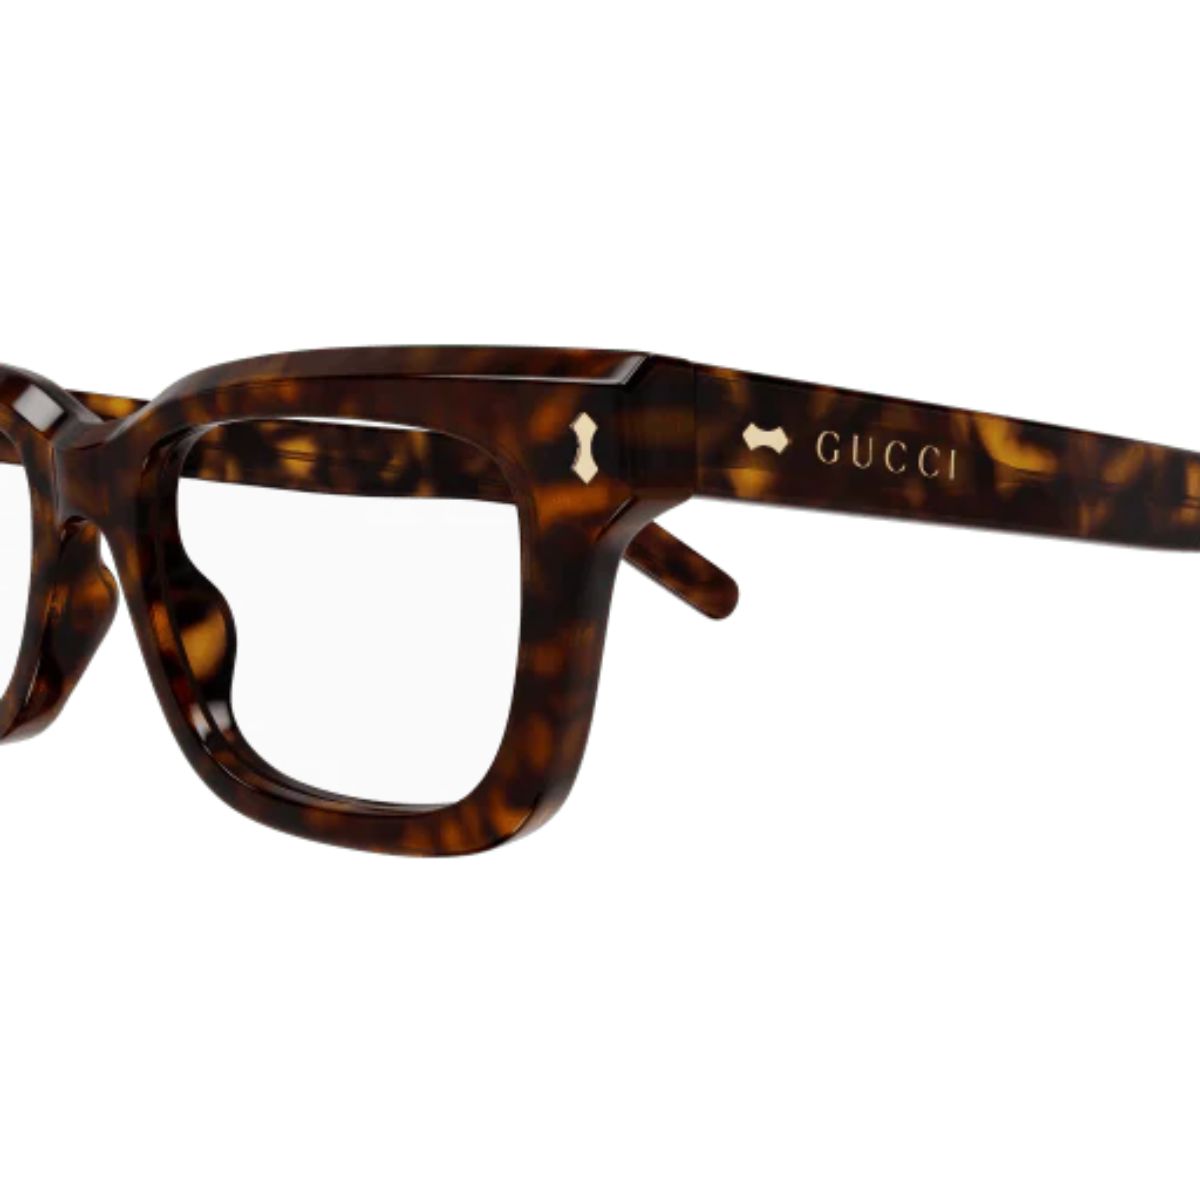 "Gucci 1522O 006 Unisex Frames - Premium Eyewear Collection for Men and Women"